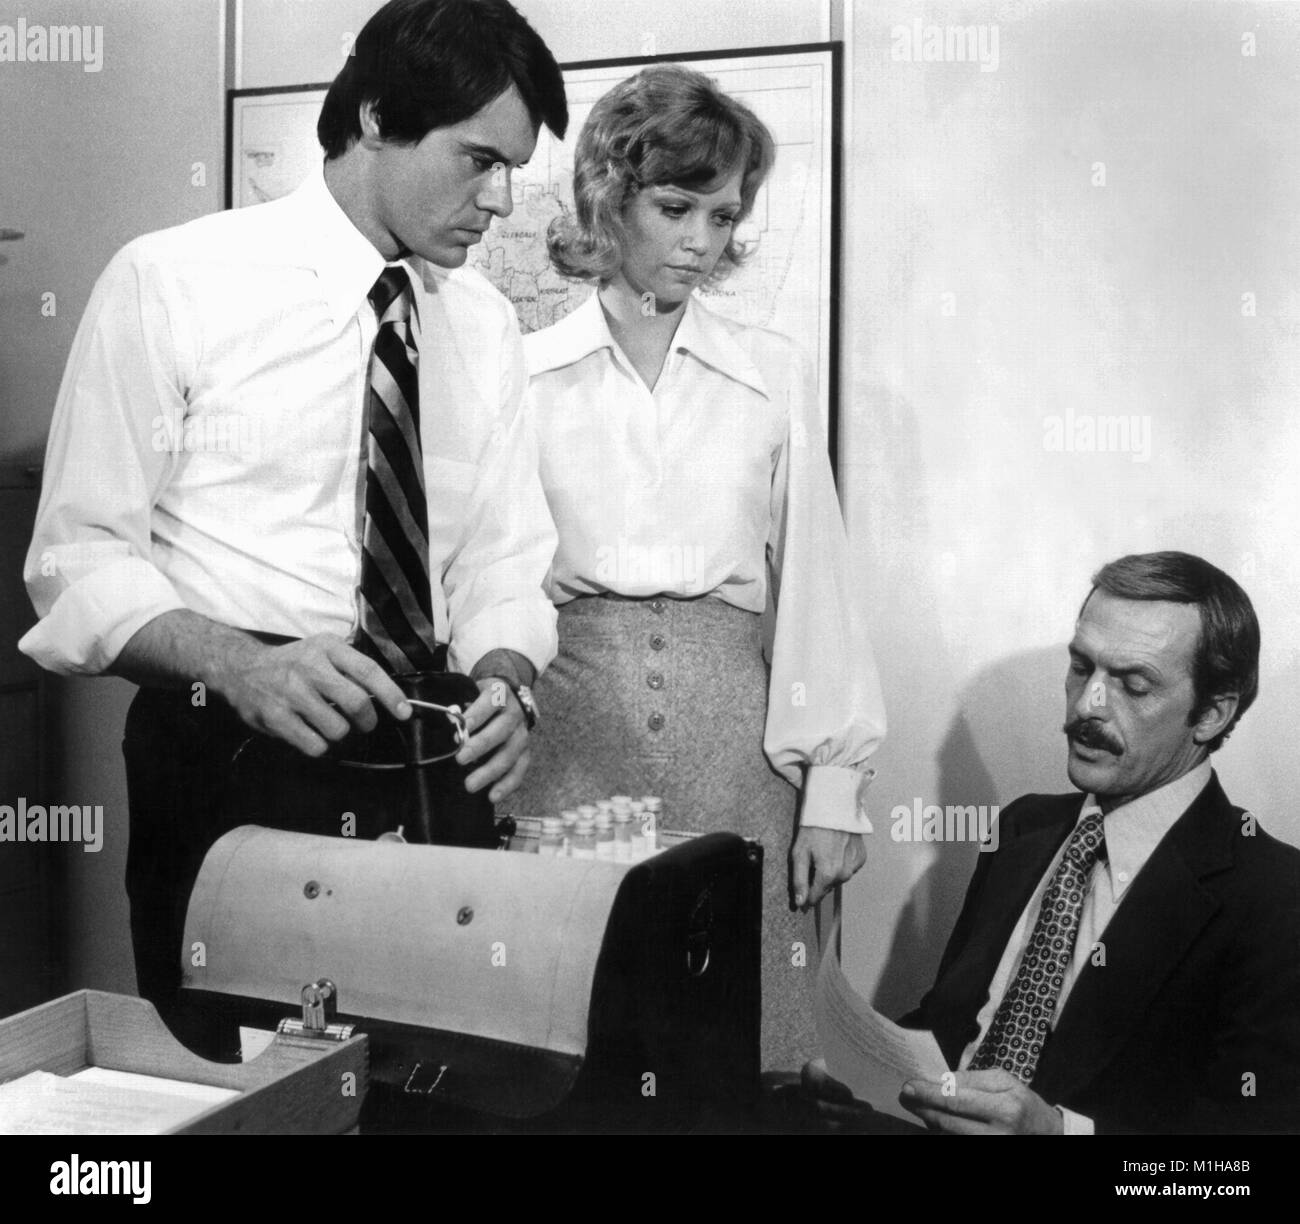 Publicity still showing three actors, Robert Urich, Maureen Reagan and Jack Hogan, posing on set, in an office/lab with a bag full of test tubes, during the filming of the TV pilot titled 'The Specialist' which featured fictional Public Health officials and was not picked up as a series, 1974. Image courtesy CDC. () Stock Photo